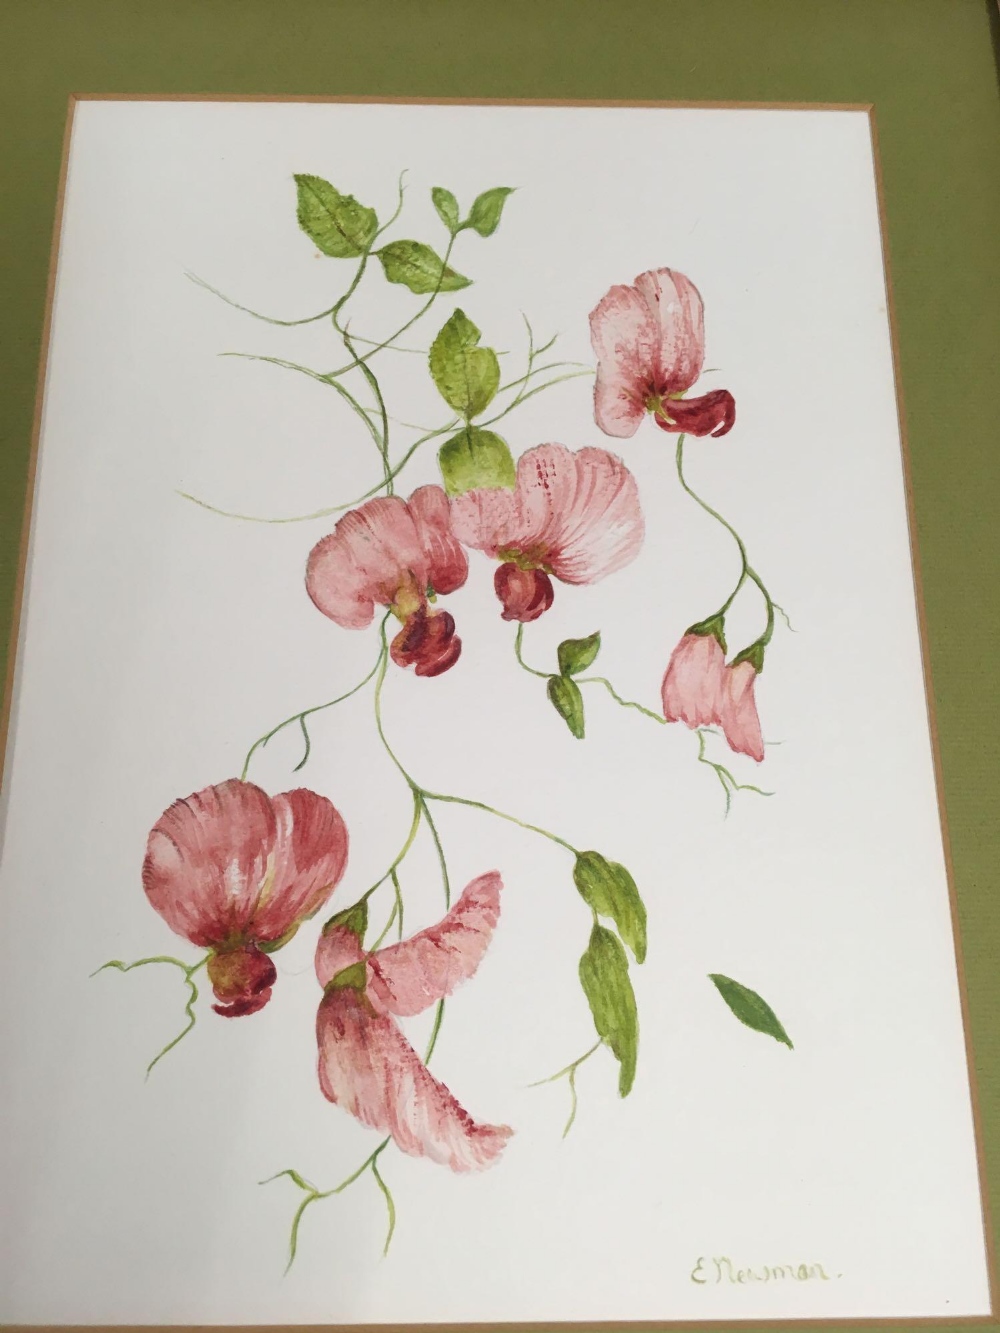 2 PAIRS OF ORIGINAL WATERCOLOURS OF FLOWERS, EACH SIGNED E NEWMAN - Image 5 of 5